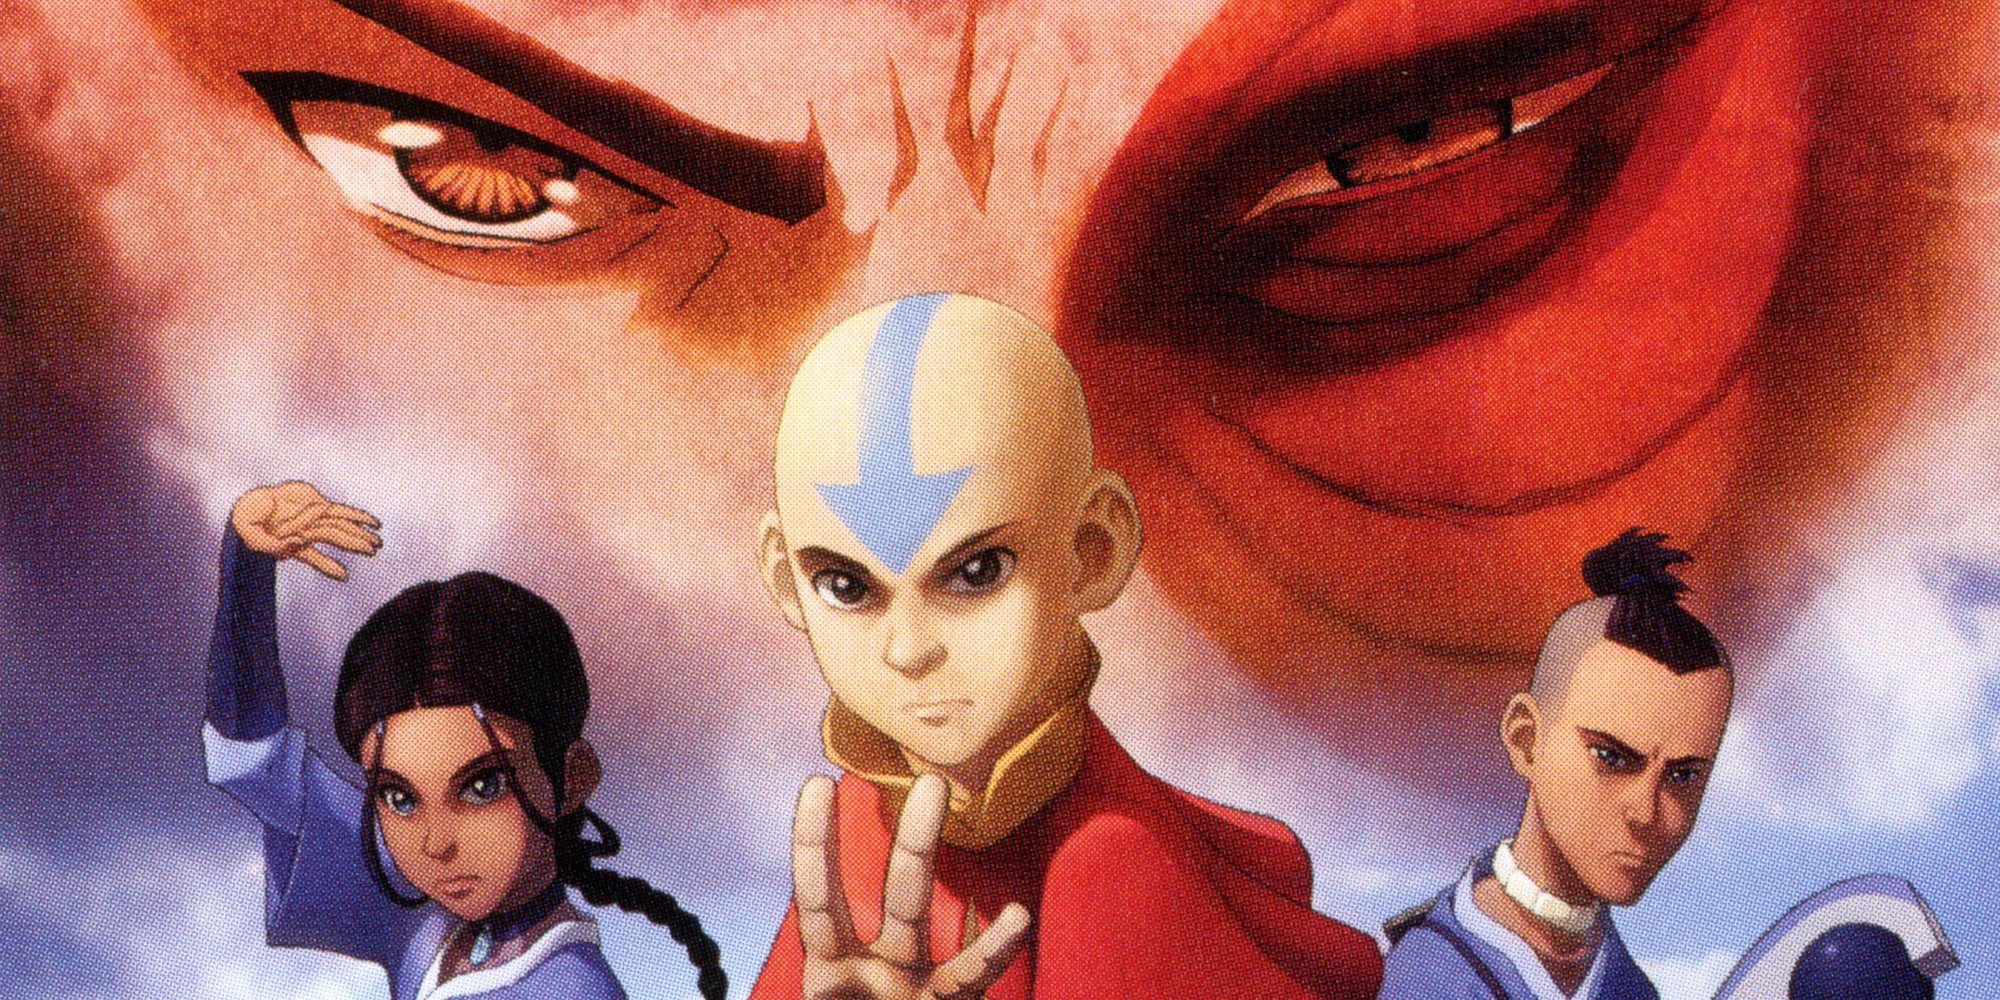 A poster for Avatar: The Last Airbender season one